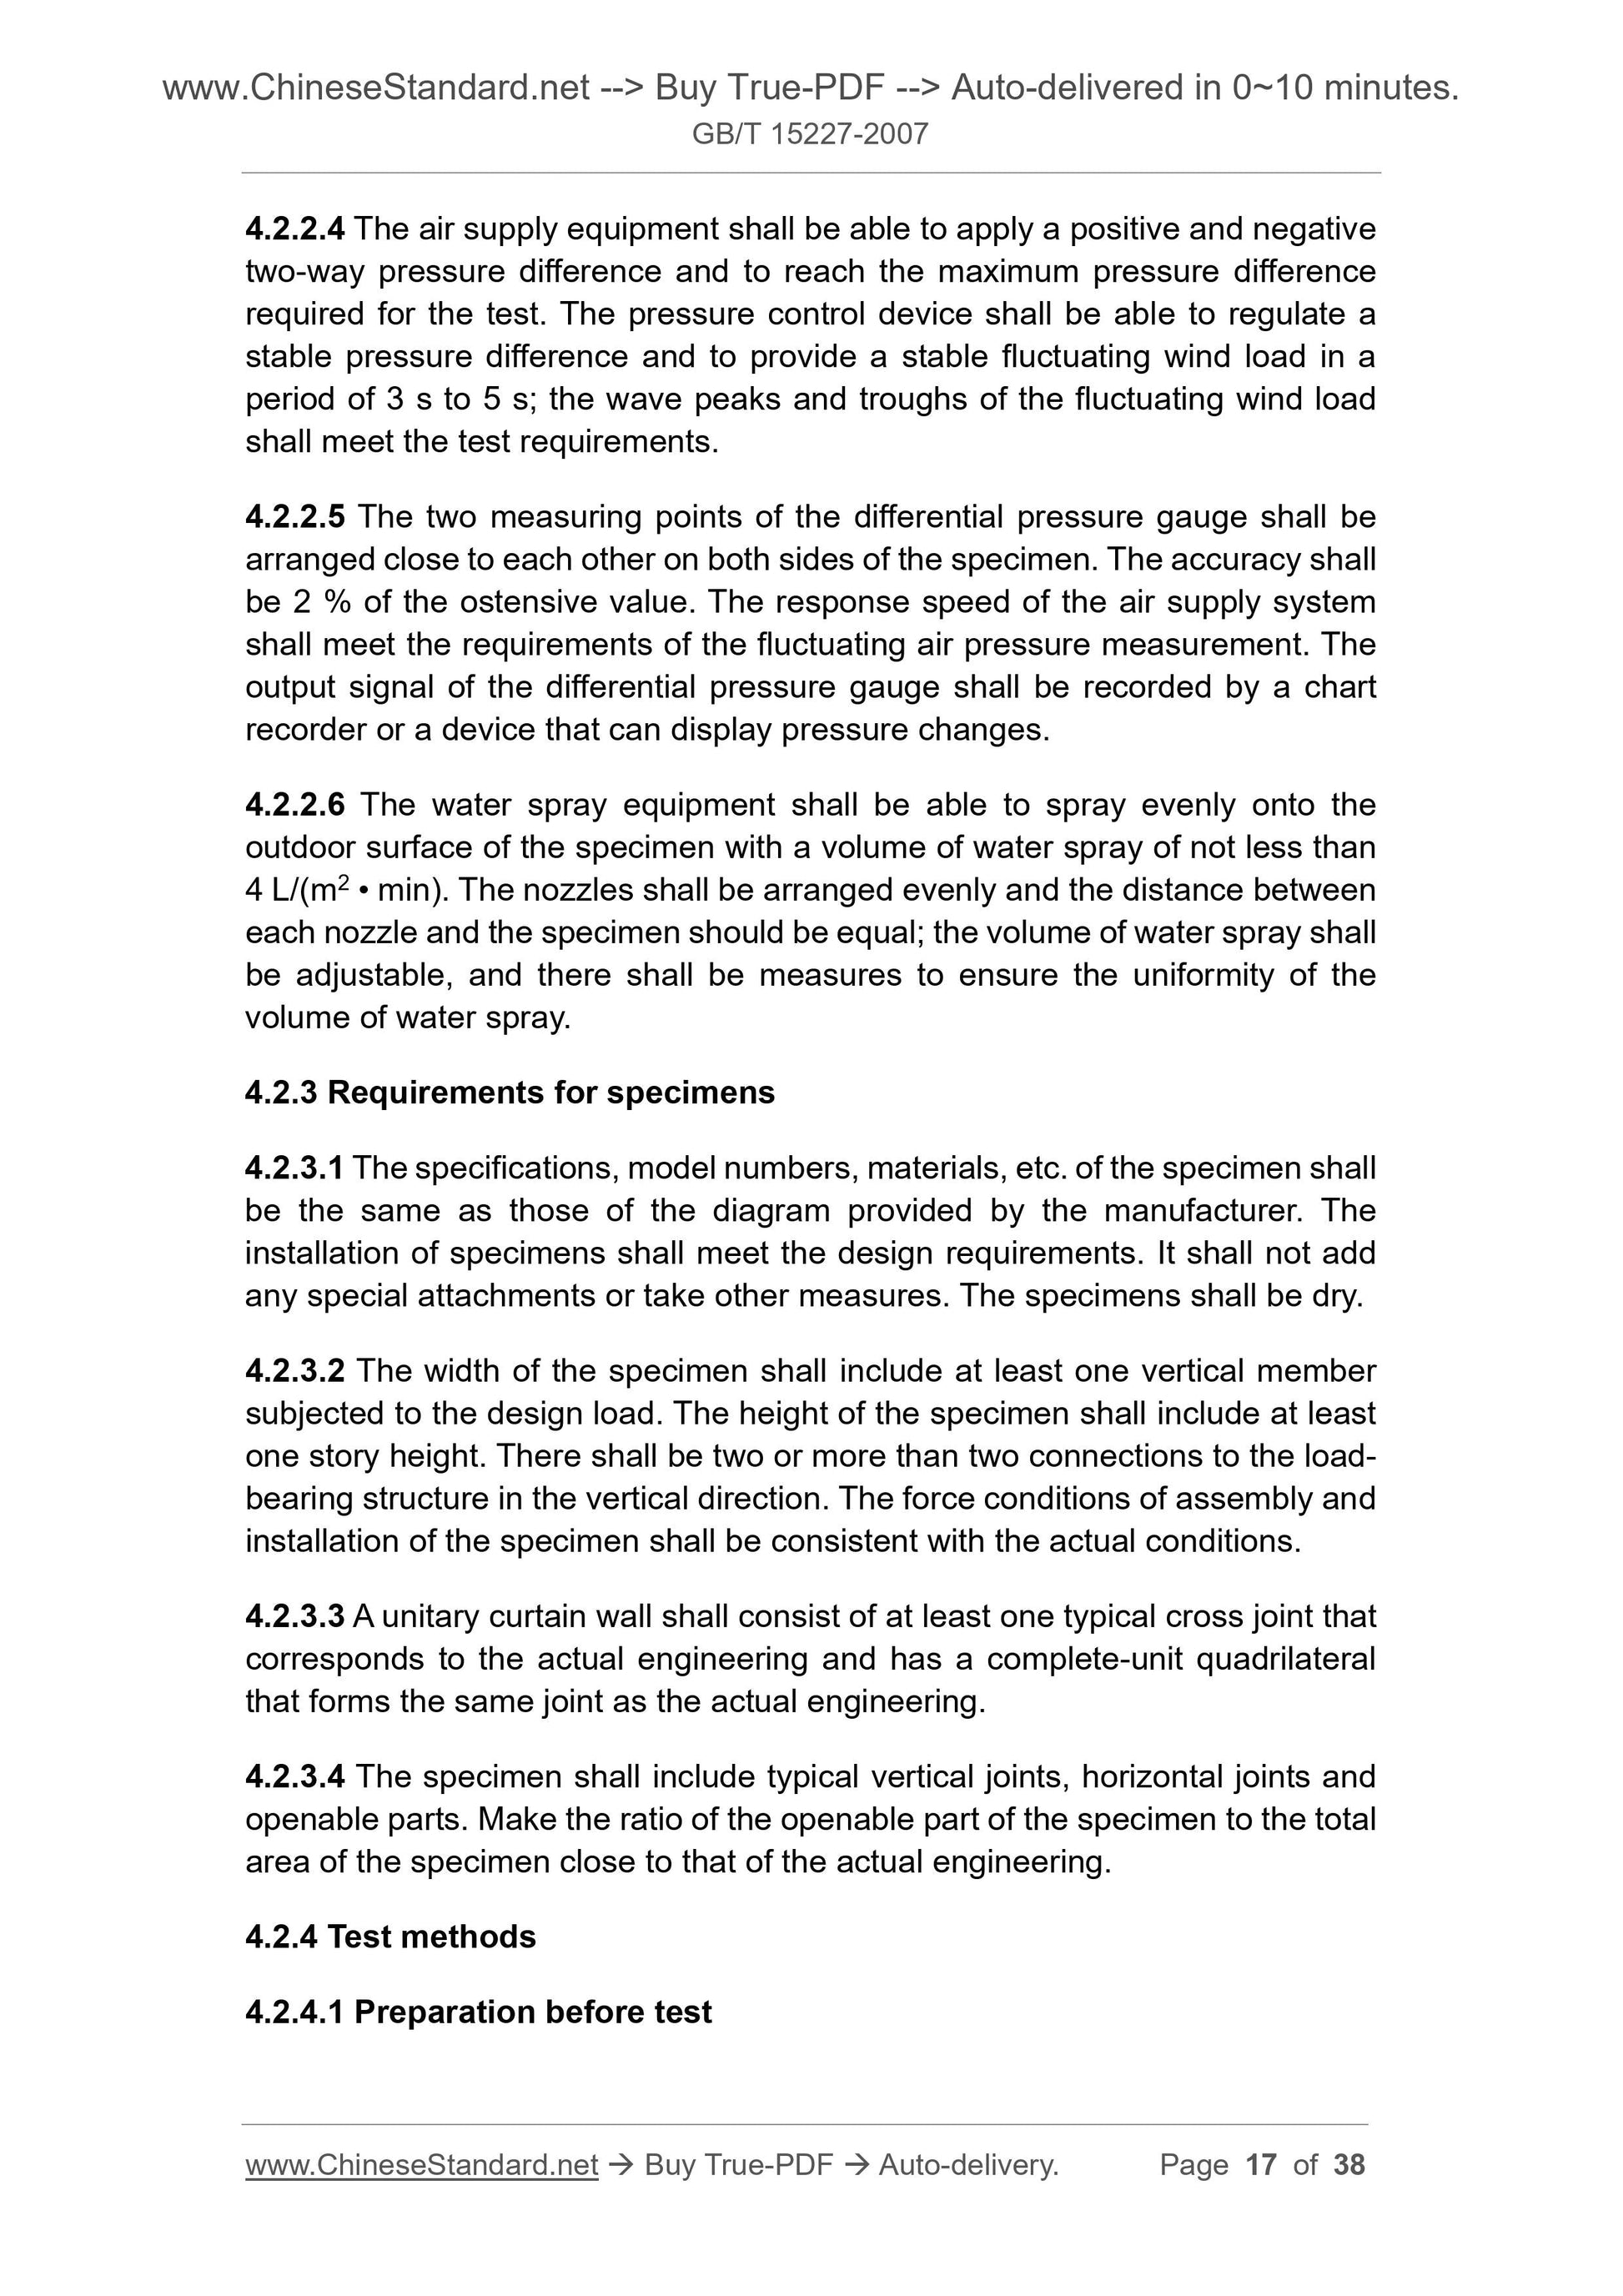 GB/T 15227-2007 Page 8